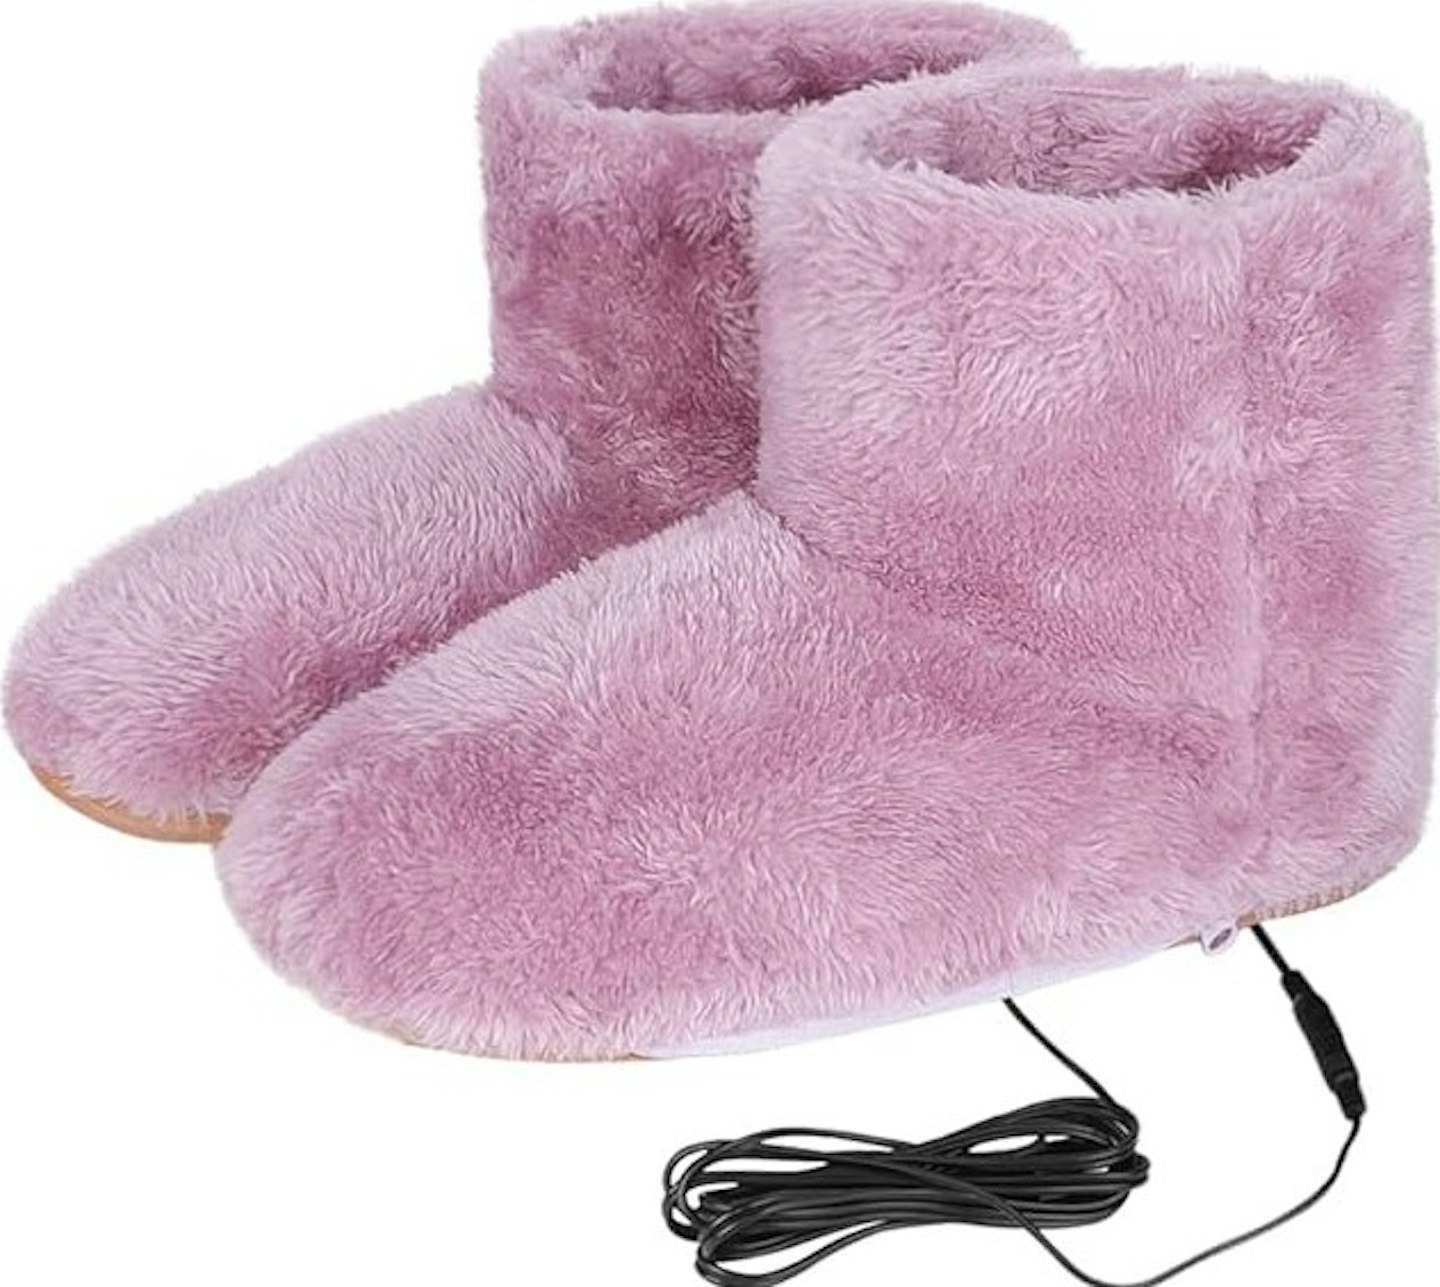 IBLUELOVER USB Heating Slippers Chargeable